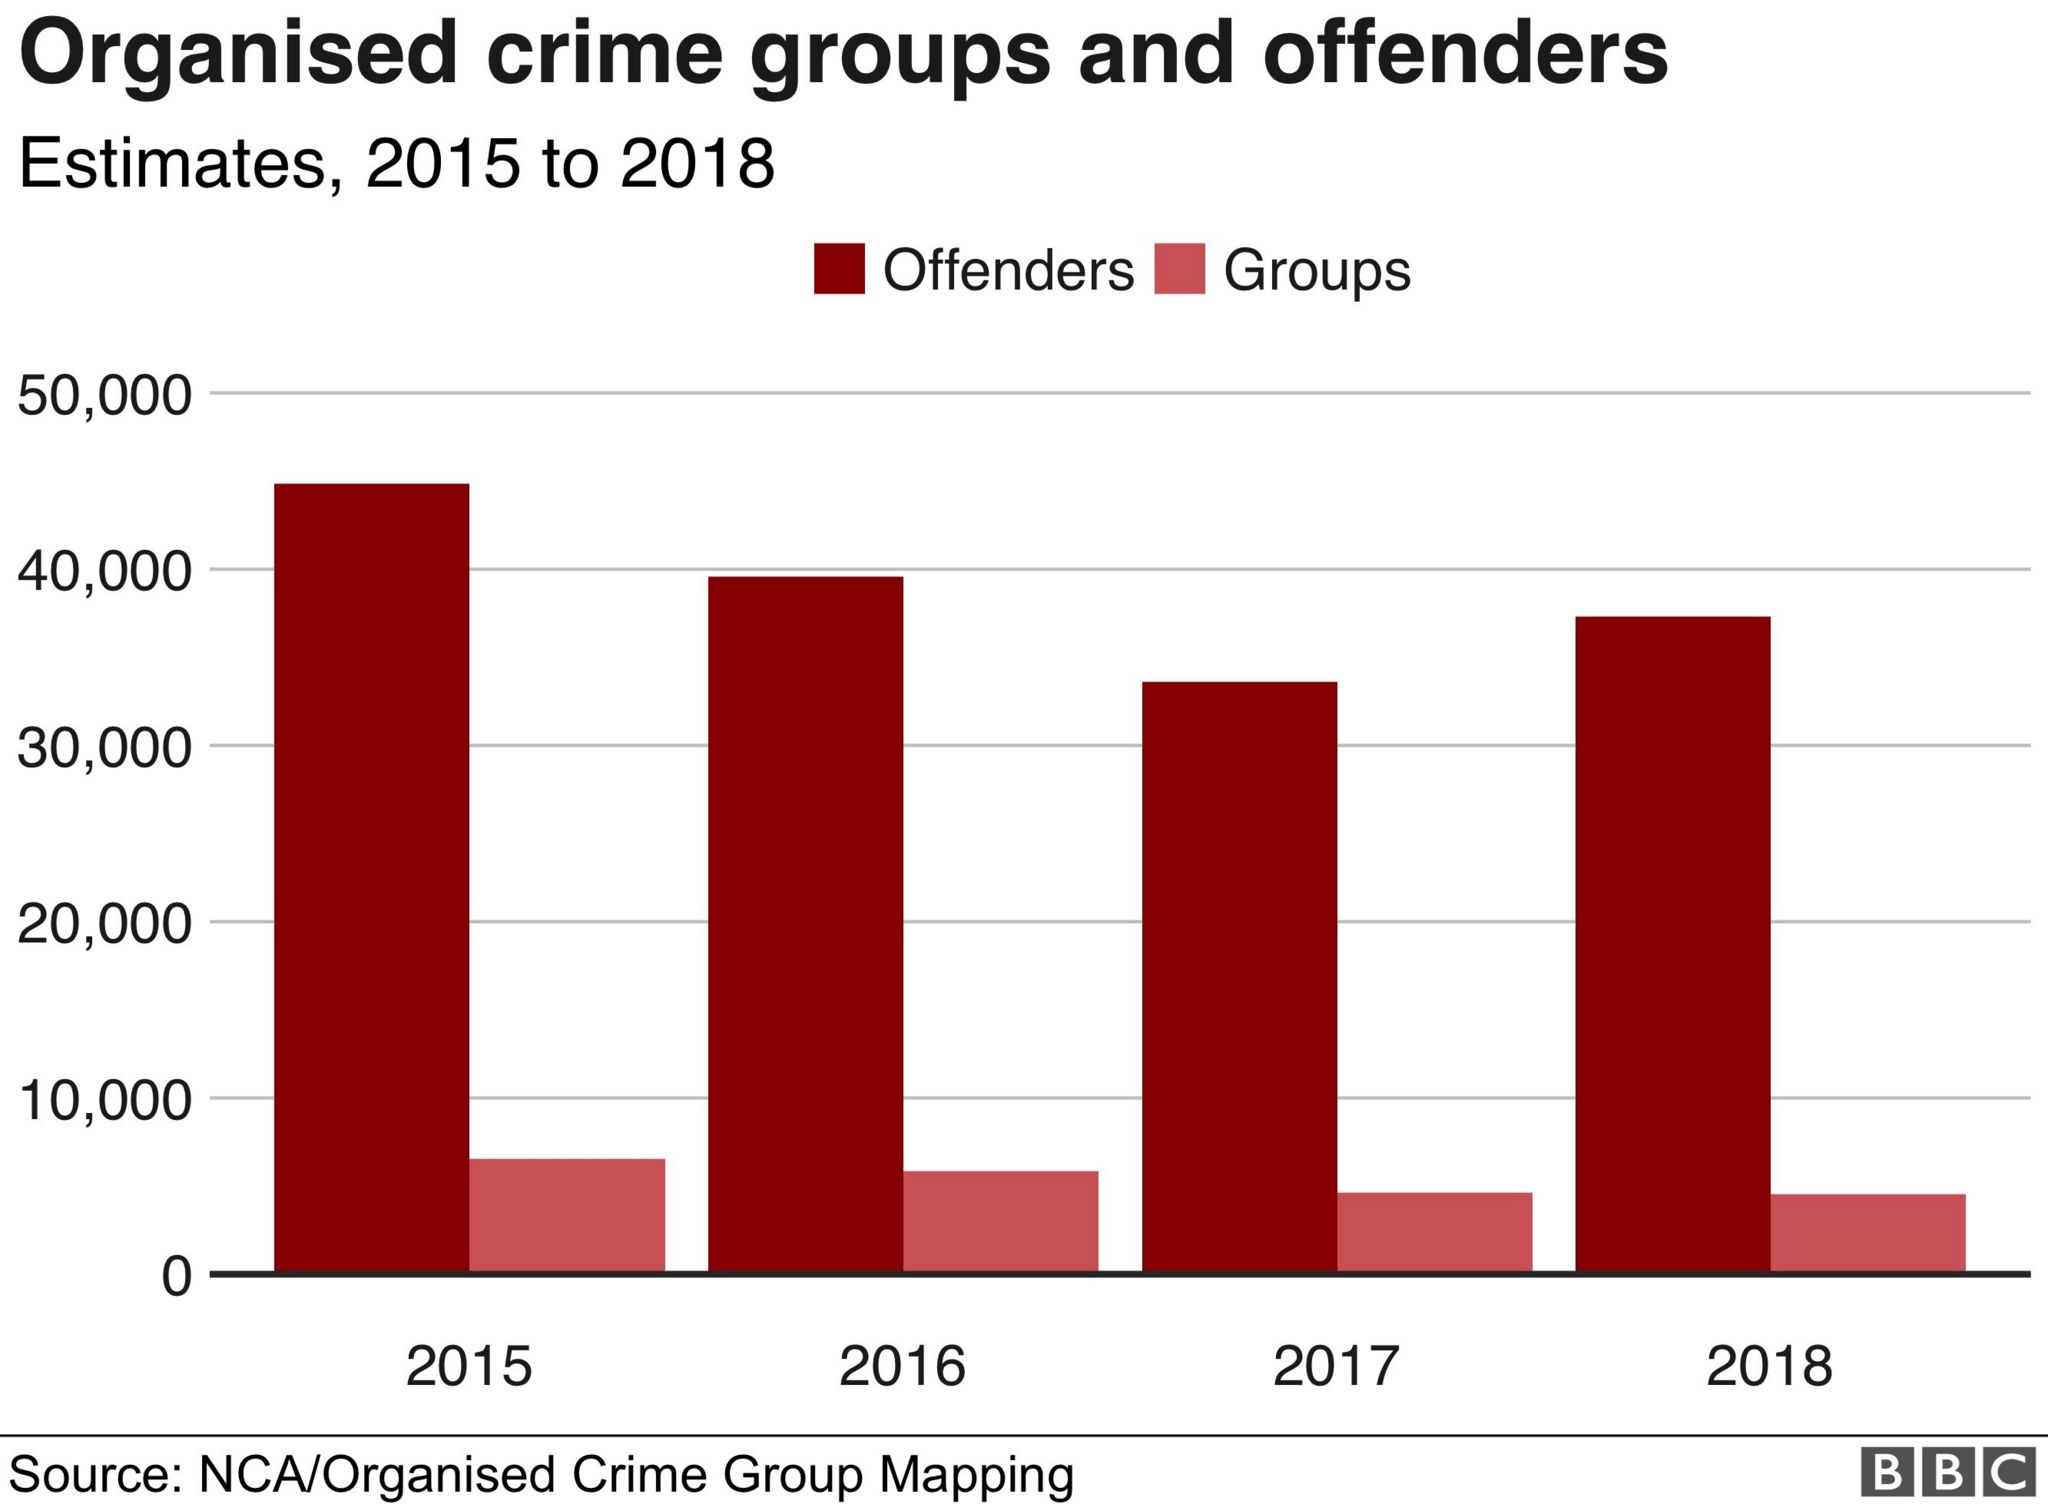 Bar chart shows estimated number of crime groups and offenders in the UK